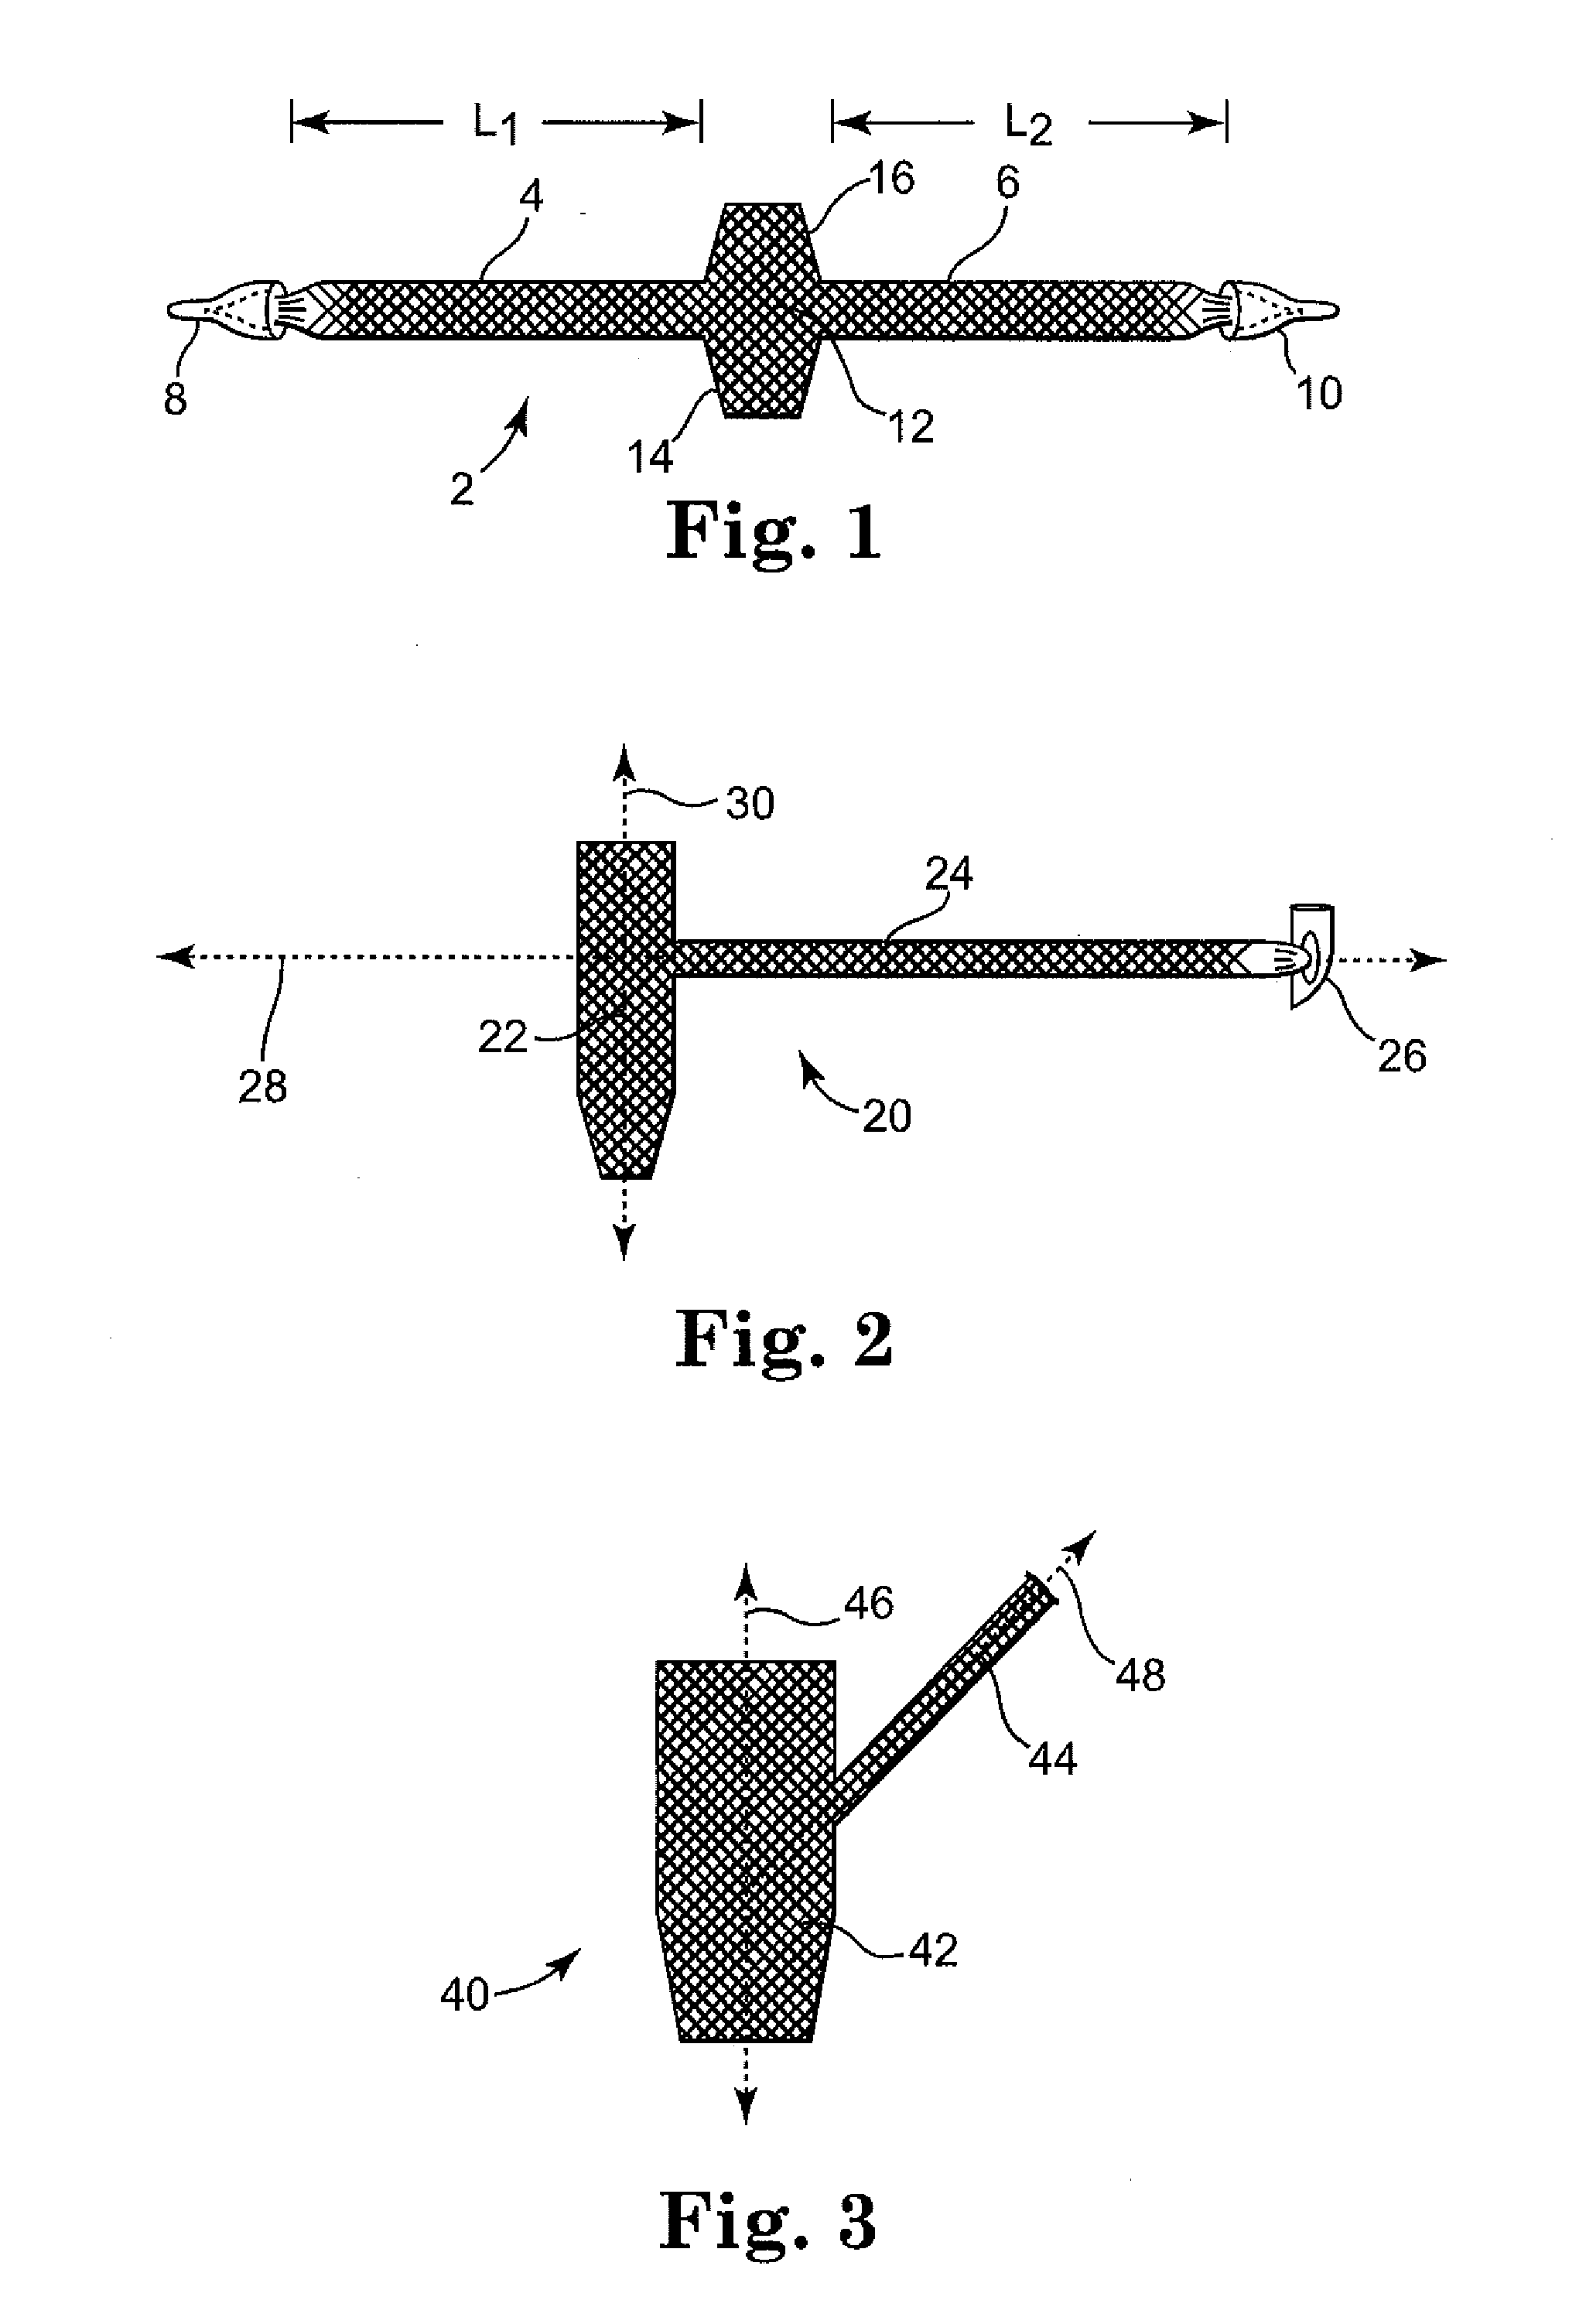 Articles, devices, and methods for pelvic surgery